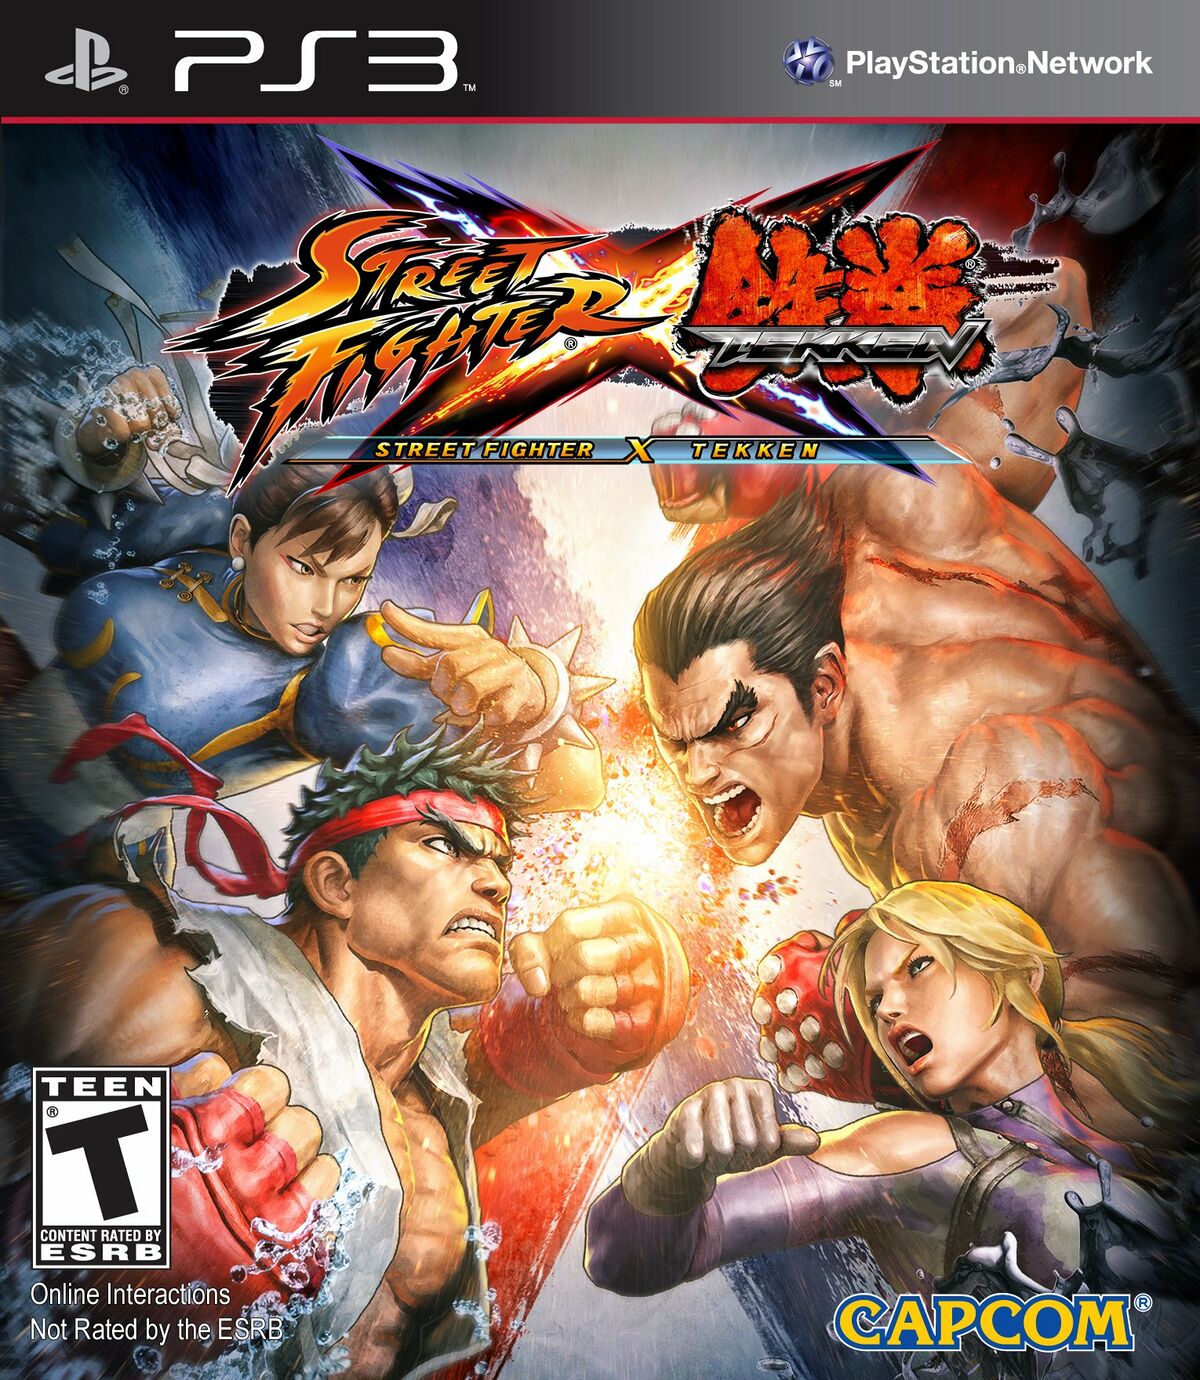 Street Fighter X Tekken — StrategyWiki Strategy guide and game